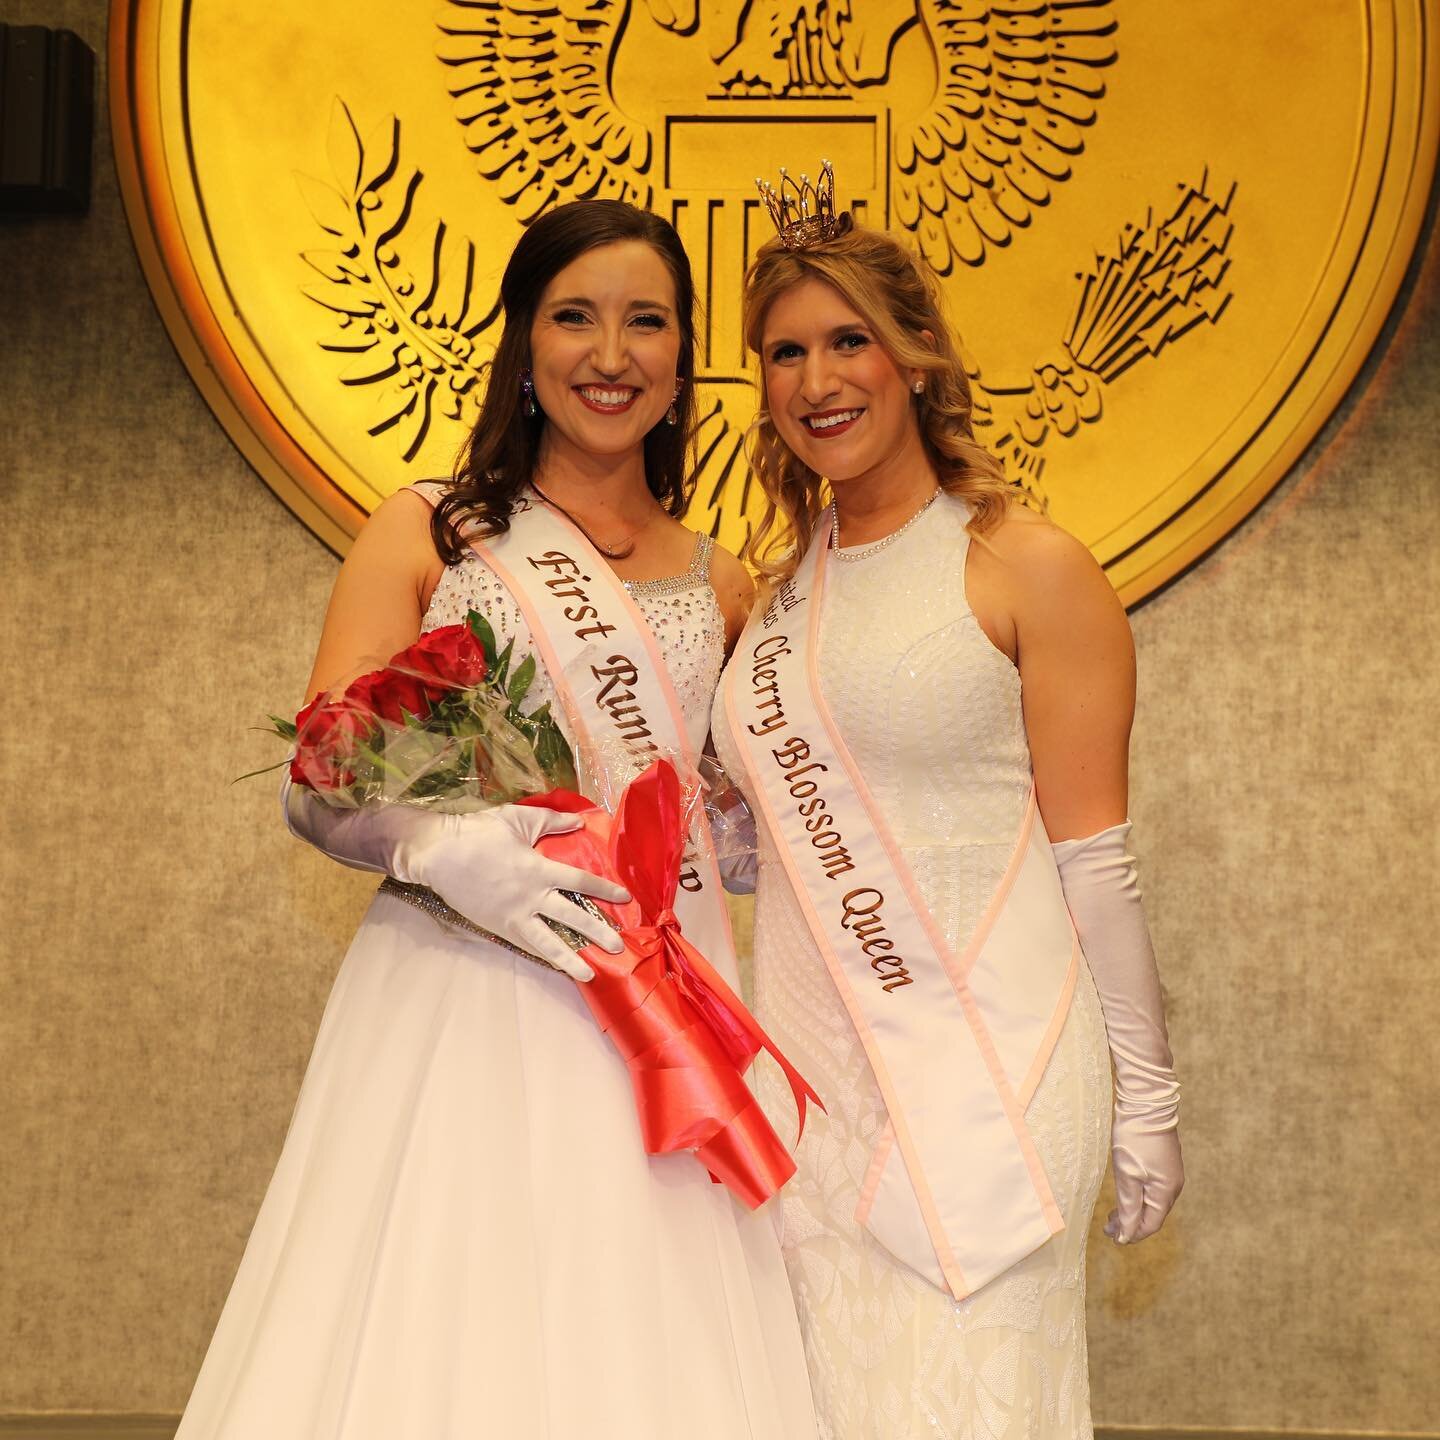 Alabama&rsquo;s 2022 Cherry Blossom Princess is First Runner Up to the U.S. Cherry Blossom Queen!!! We are SO proud of you, @lyerby! Thank you for representing ALSS and the great State of Alabama with such poise this week. 🌸💕